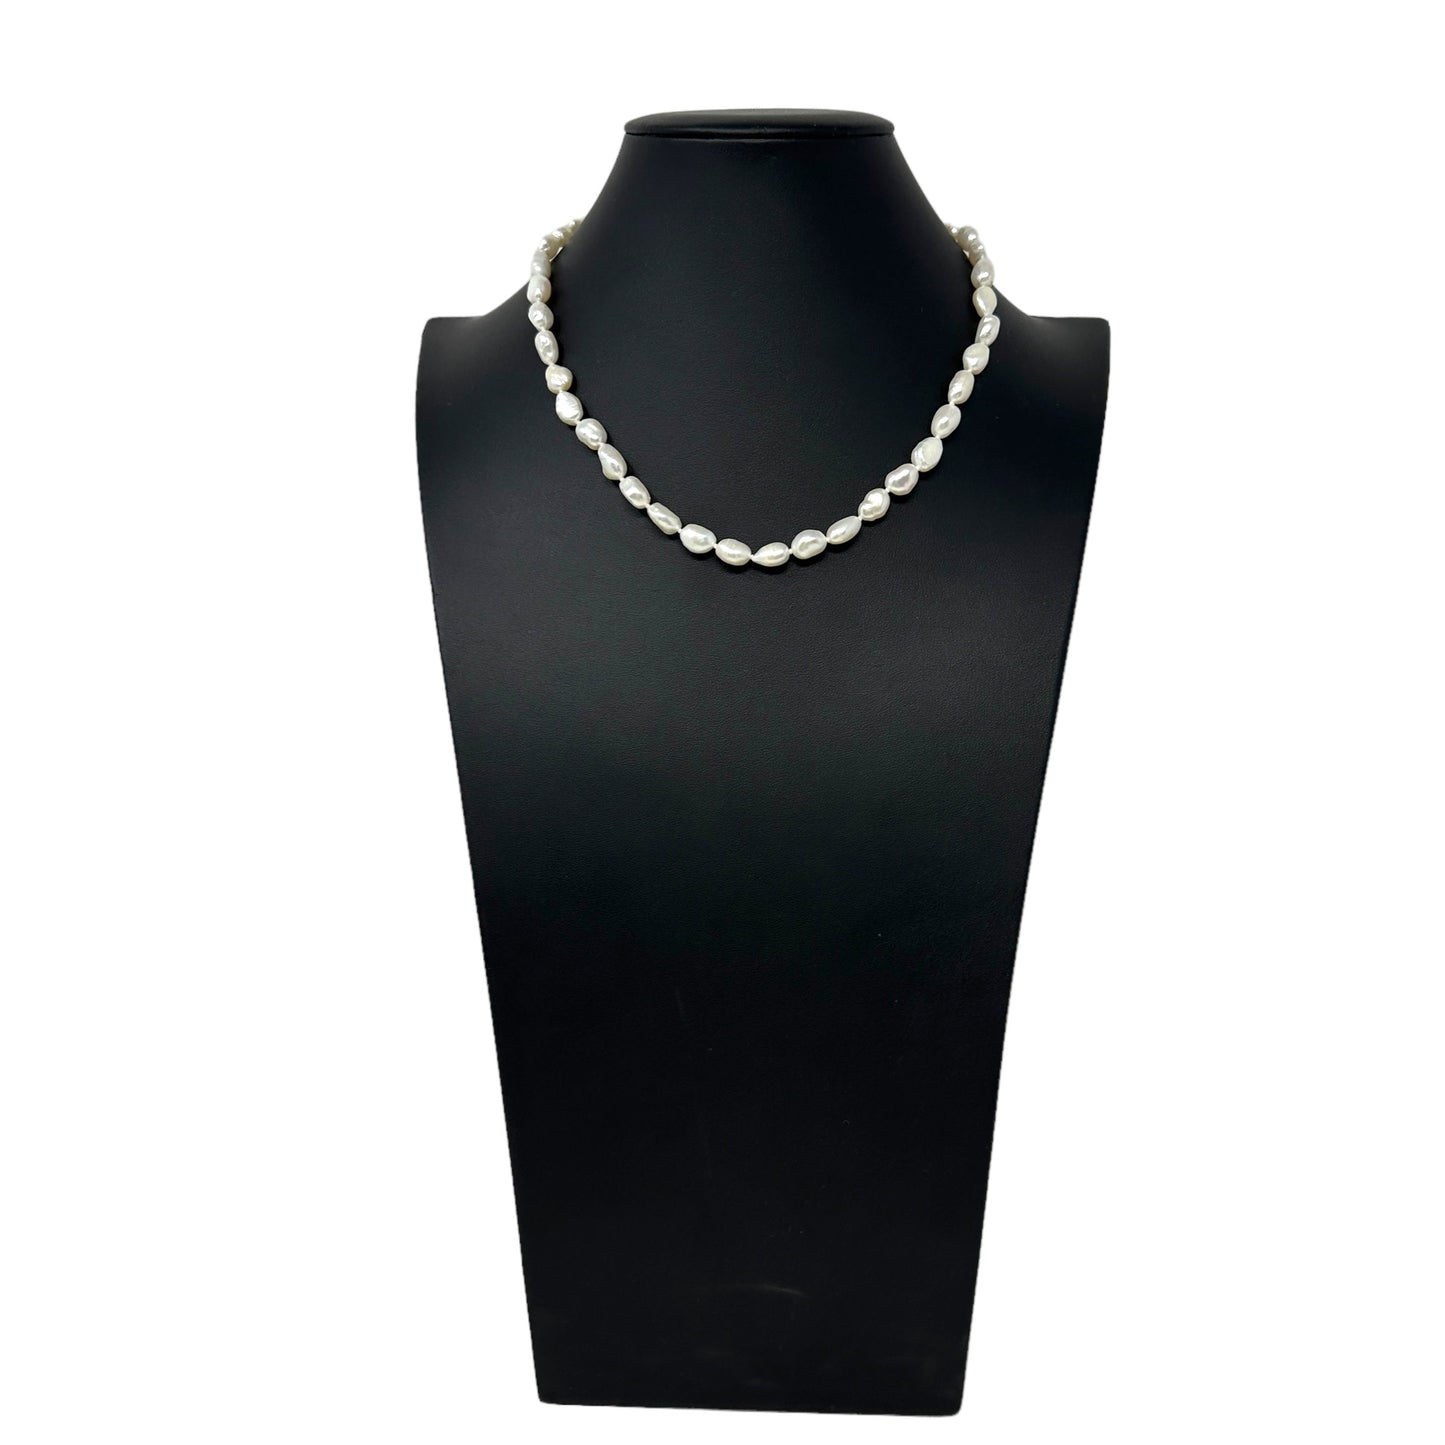 Freshwater Pearl Strand Necklace Unknown Brand